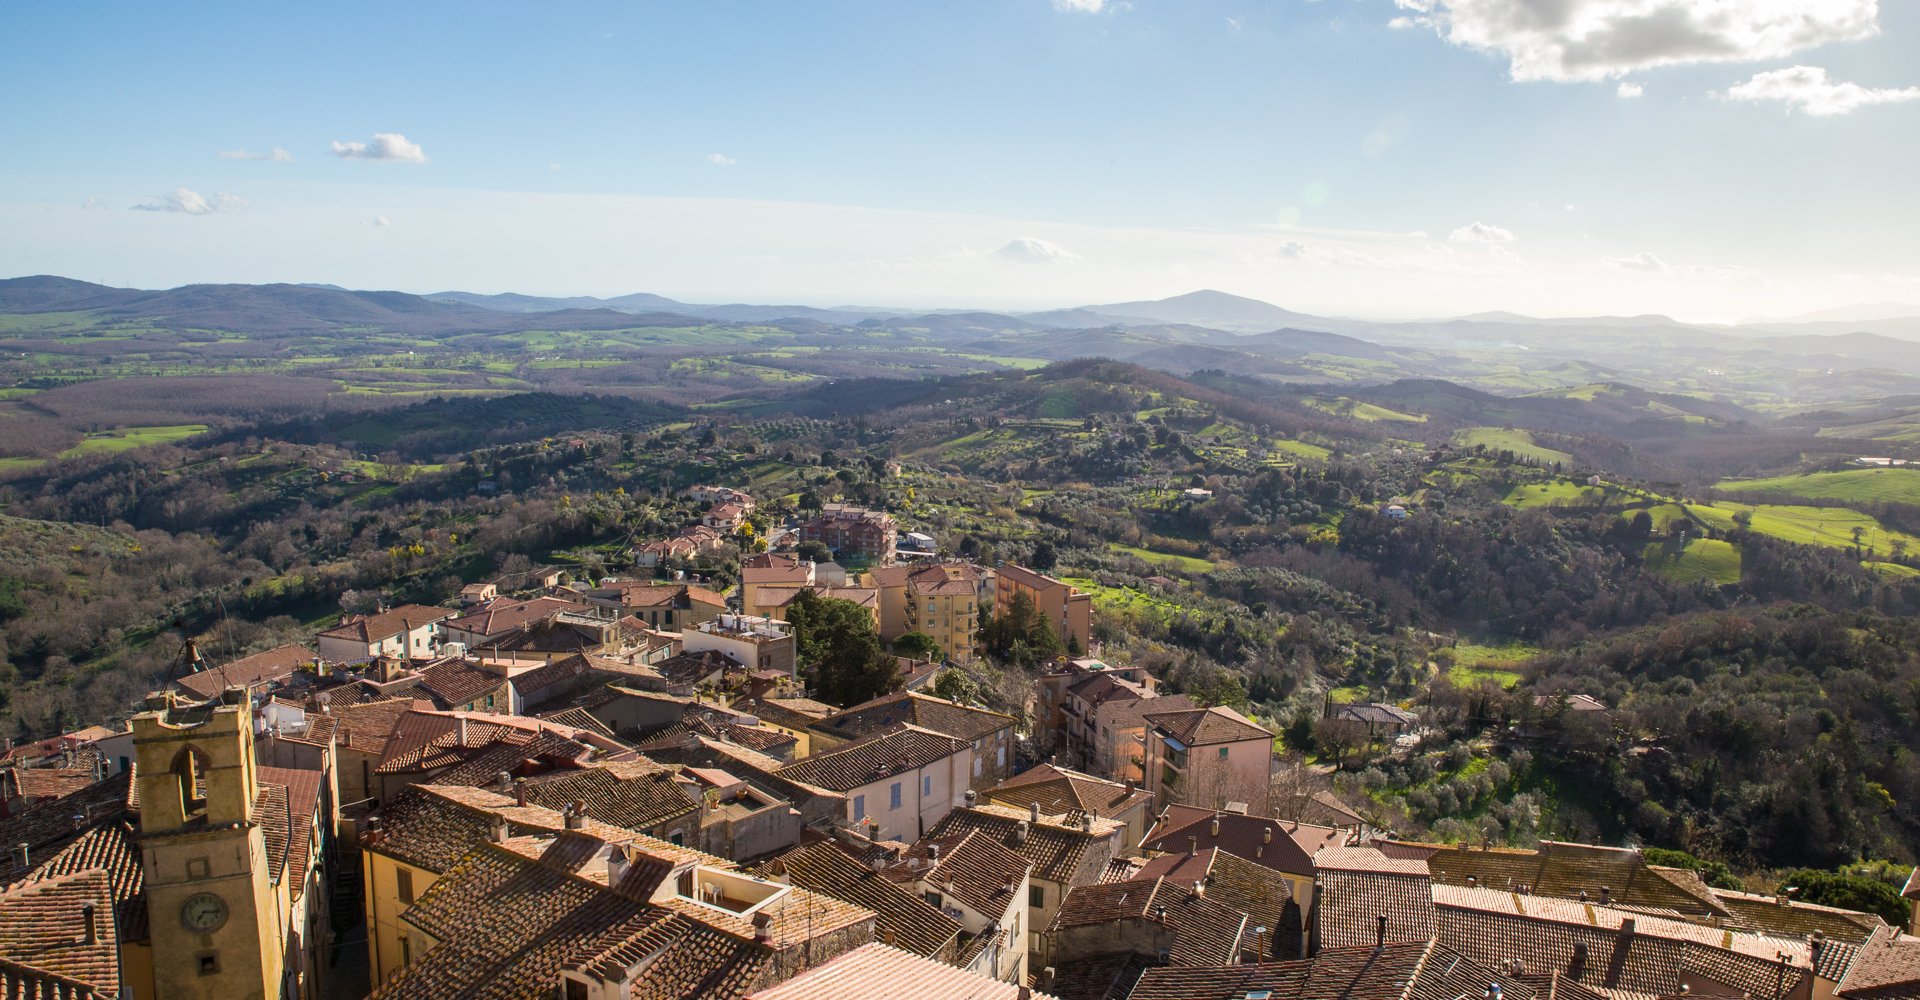 Manciano and surroundings from the Aldobrandesca tower